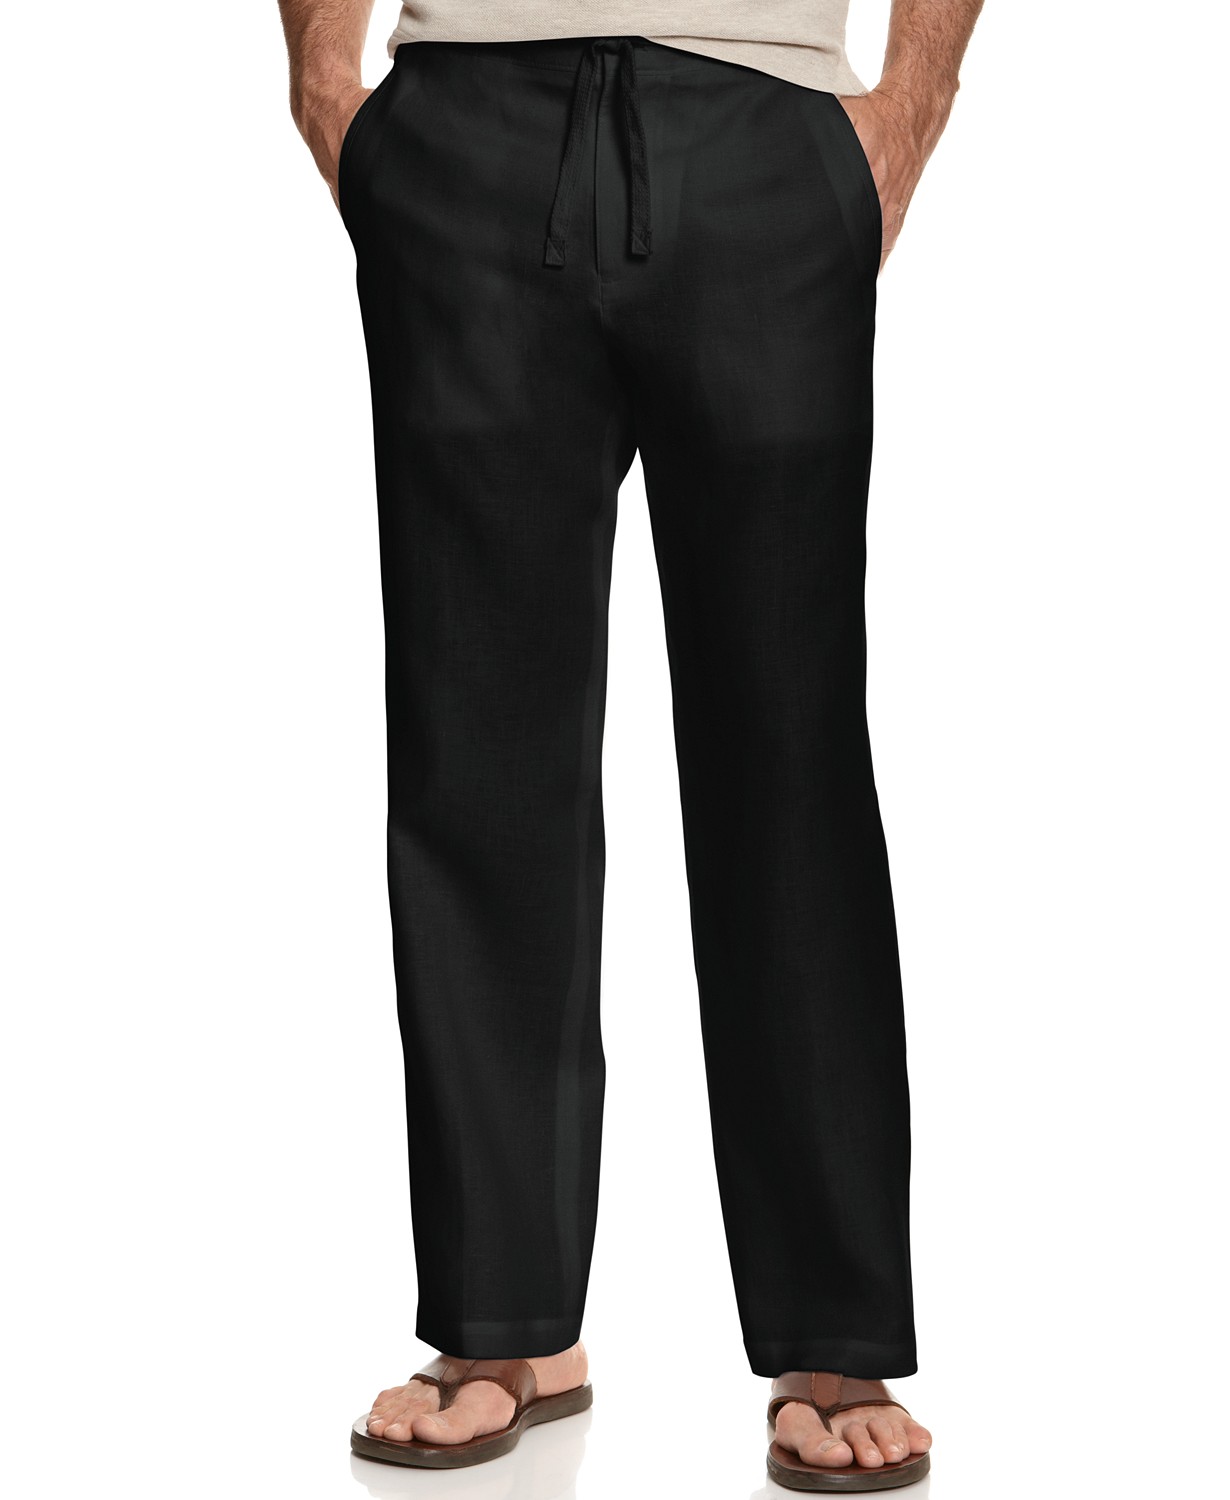 www.couturepoint.com-tommy-hilfiger-mens-brown-modern-fit-th-flex-stretch-comfort-solid-performance-pants-copy